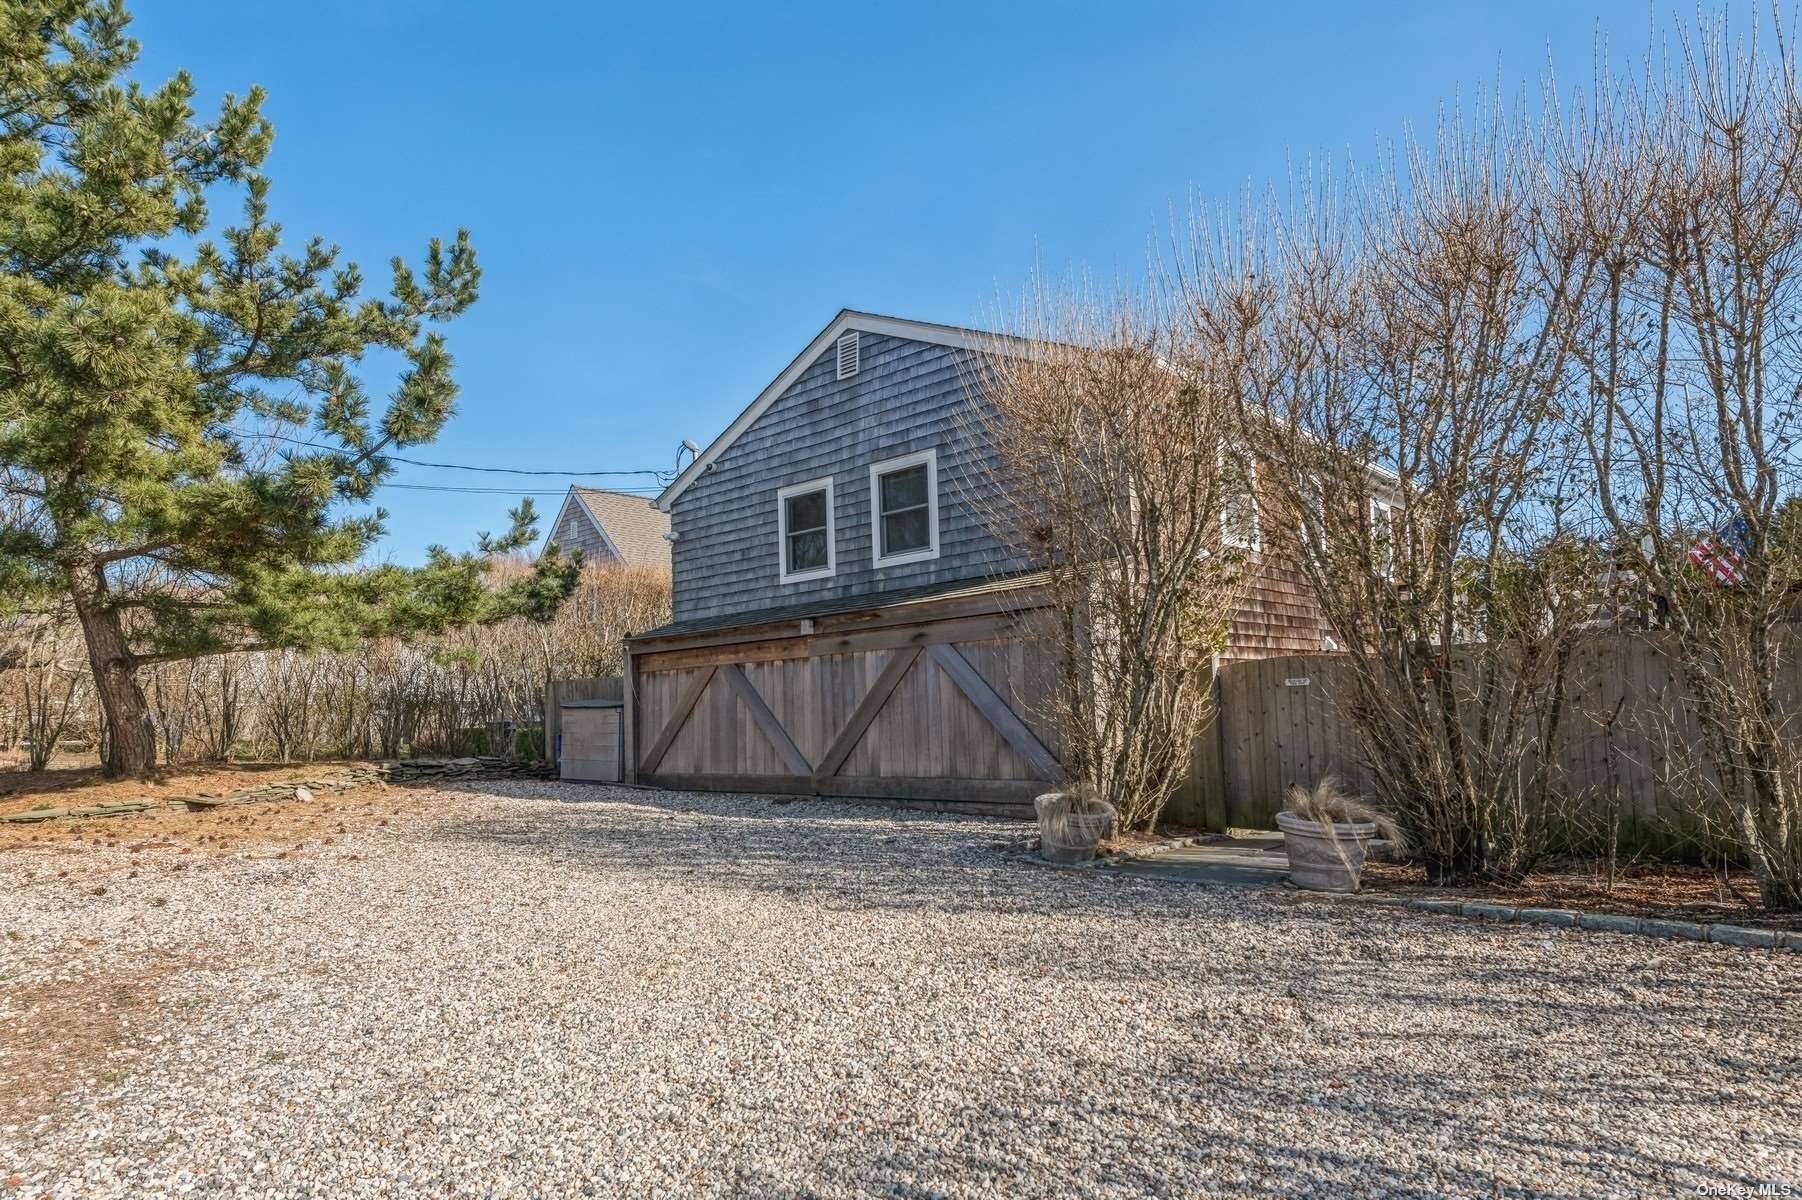 DITCH PLAINS BEACH HOUSE Gorgeous 5 bedroom, 2 bath home just blocks from family friendly Ditch Plains ocean beach known for some of the best surf on the East Coast, ...